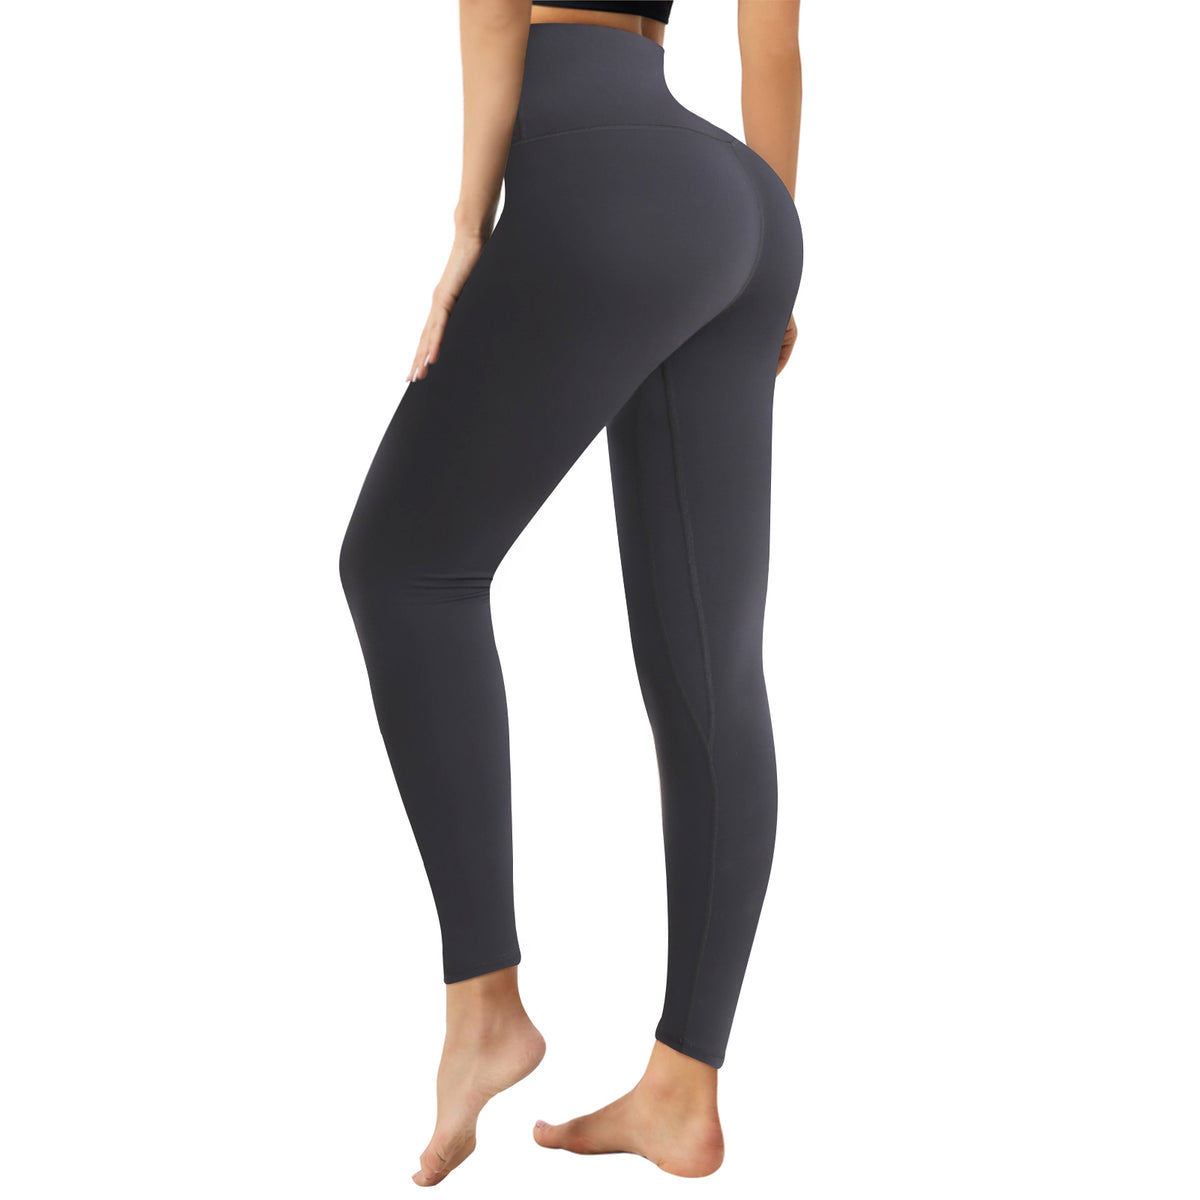 WOMEN'S HIGH WAIST LEGGINGS WITH POCKET  ES3 - CABRALLY